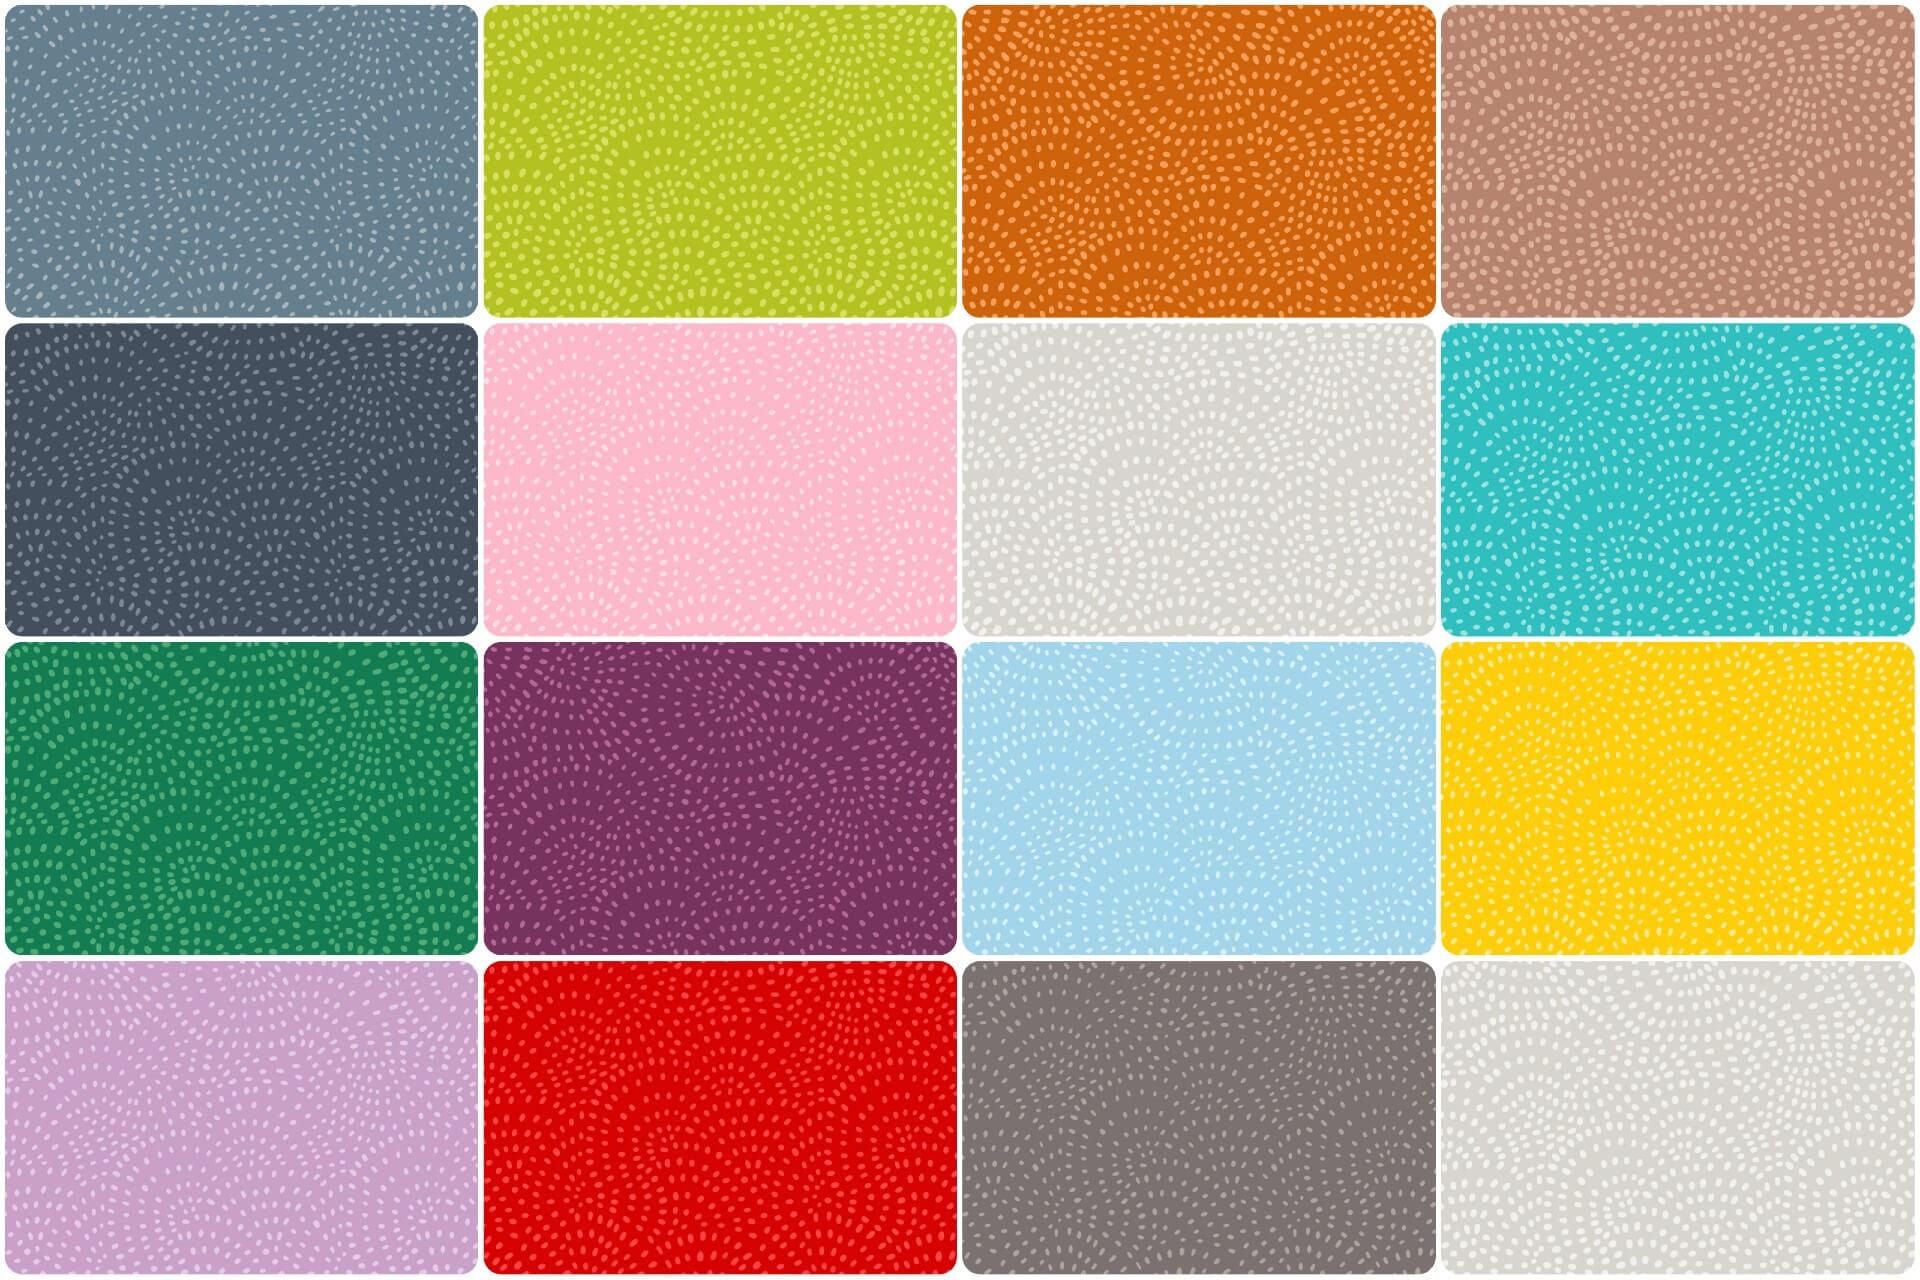 Dashwood Studio quilting cottons - twist collection